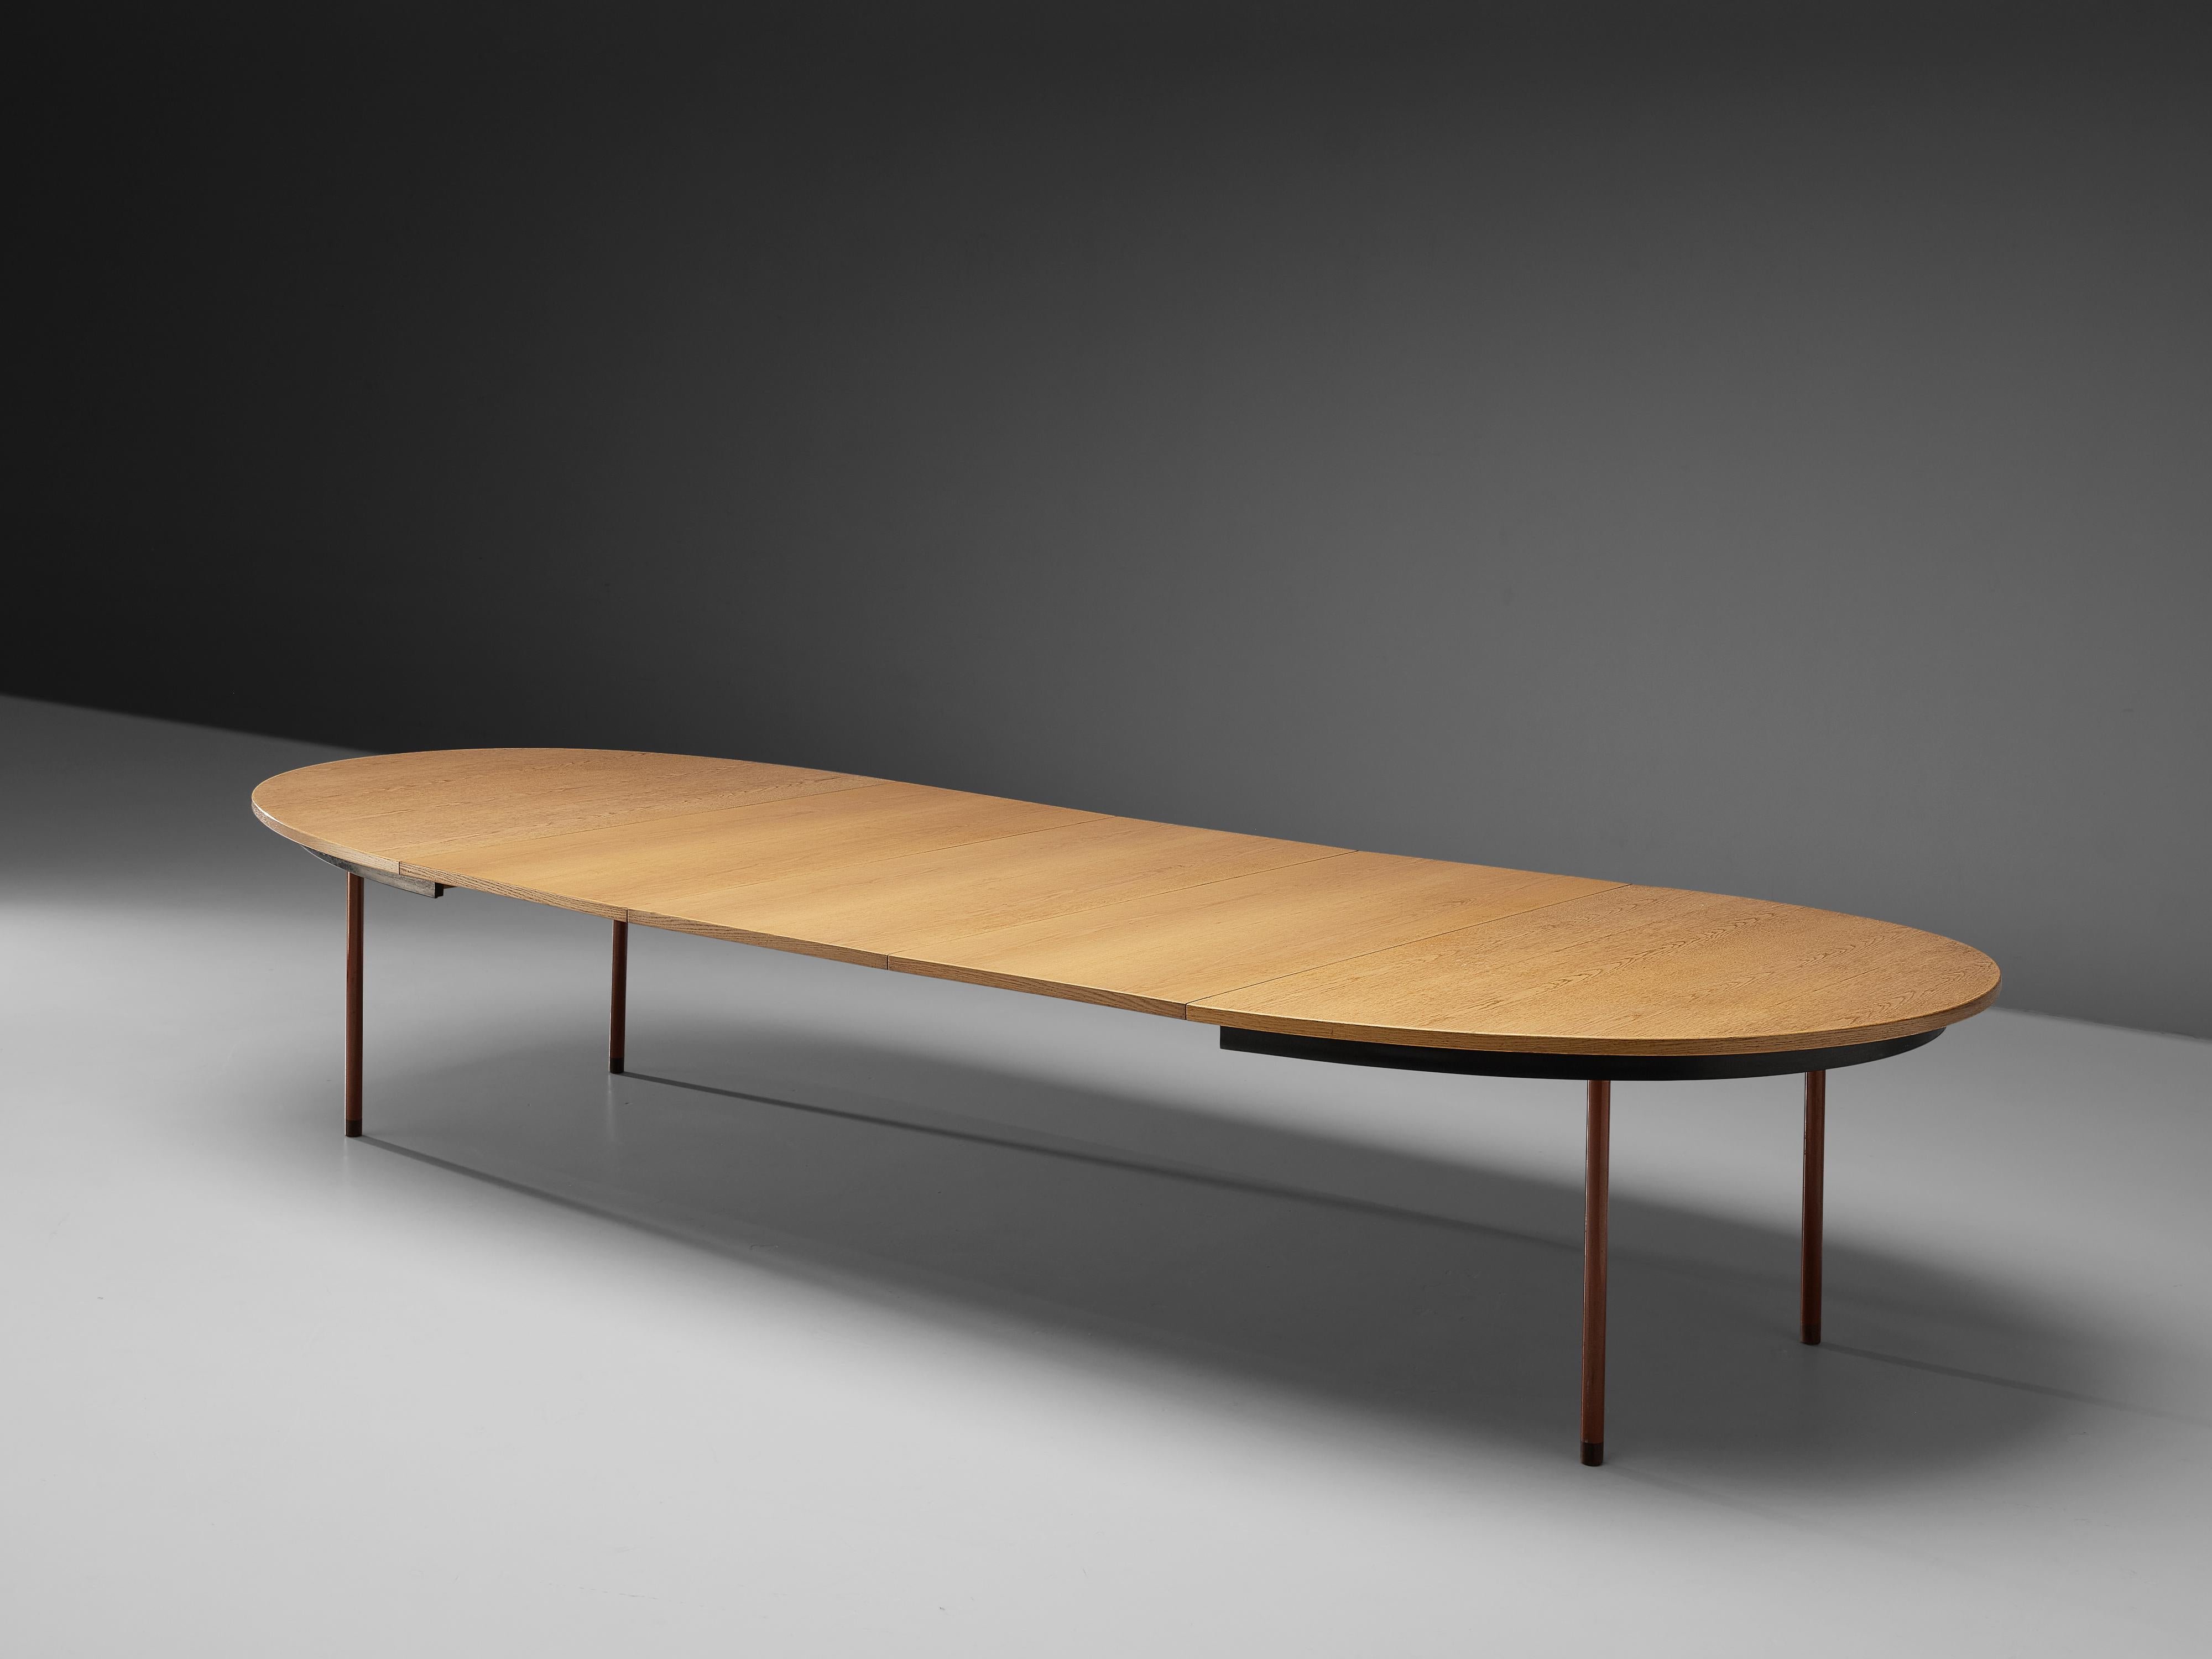 Hans J. Wegner, extendable dining table, oak, red lacquered metal, Denmark, 1950s

This table by Hans Wegner is highly functional executed within a simple and streamlined layout. Three extra leaves transform this dining table into an extra large